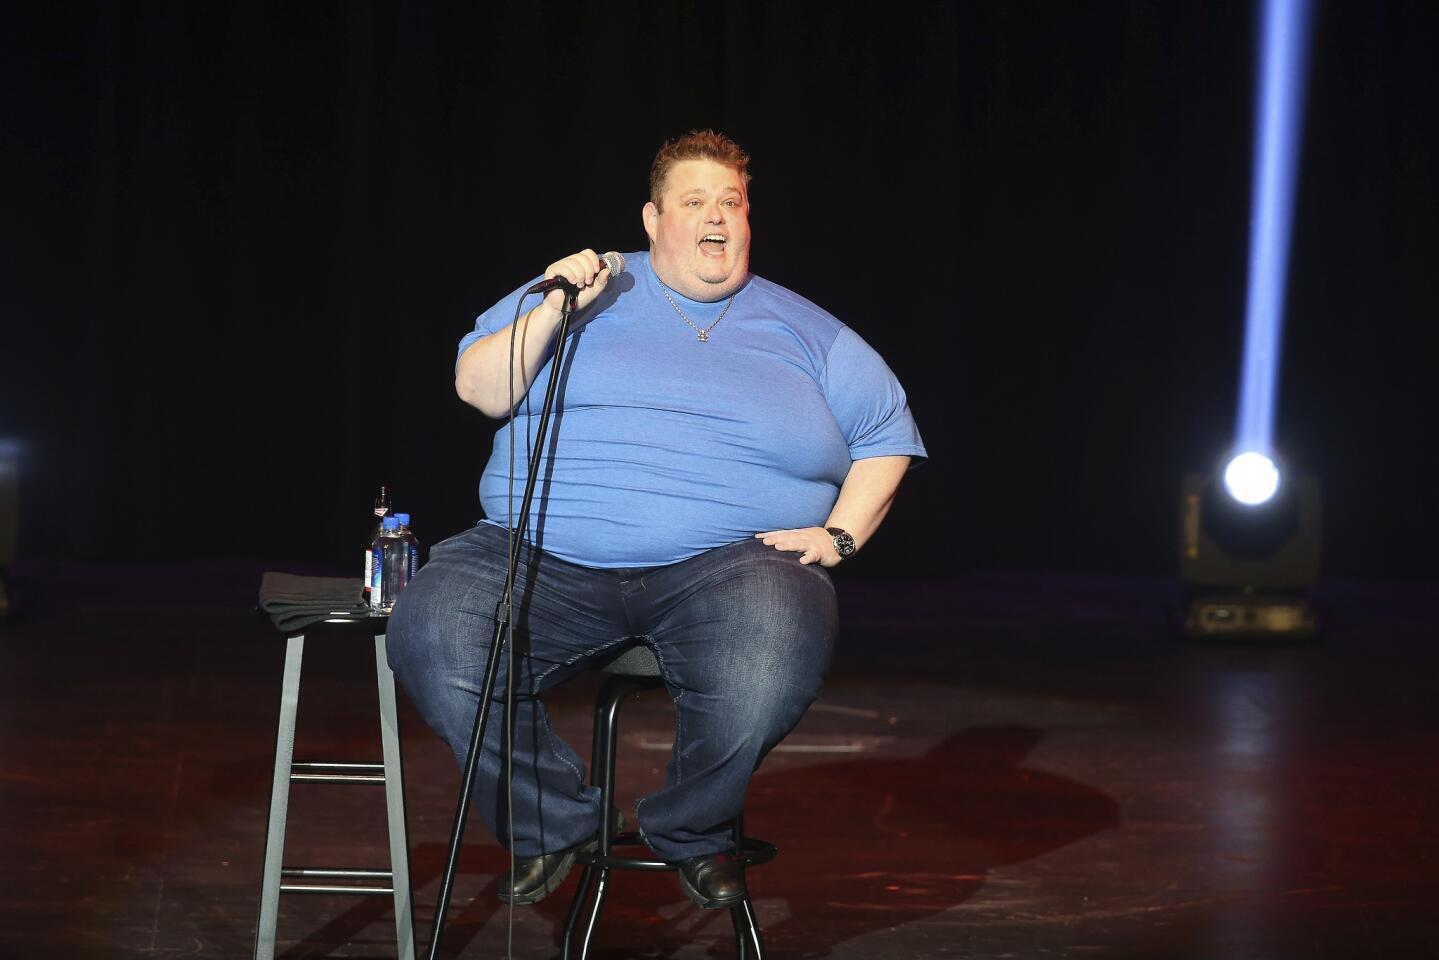 Ralphie May performs at the Paradise Cove at the River Spirit Hotel and Casino on Aug. 18, 2017. In a statement Friday, Oct. 6, 2017, publicist Stacey Pokluda says May died of cardiac arrest. She said he had been fighting pneumonia, which caused him to cancel a few appearances in the past month. Read more.